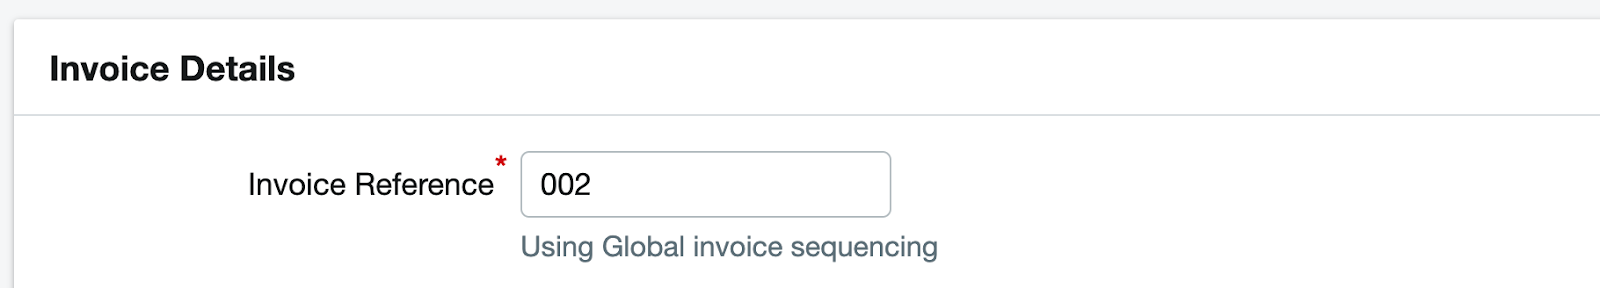 Invoice_8.png